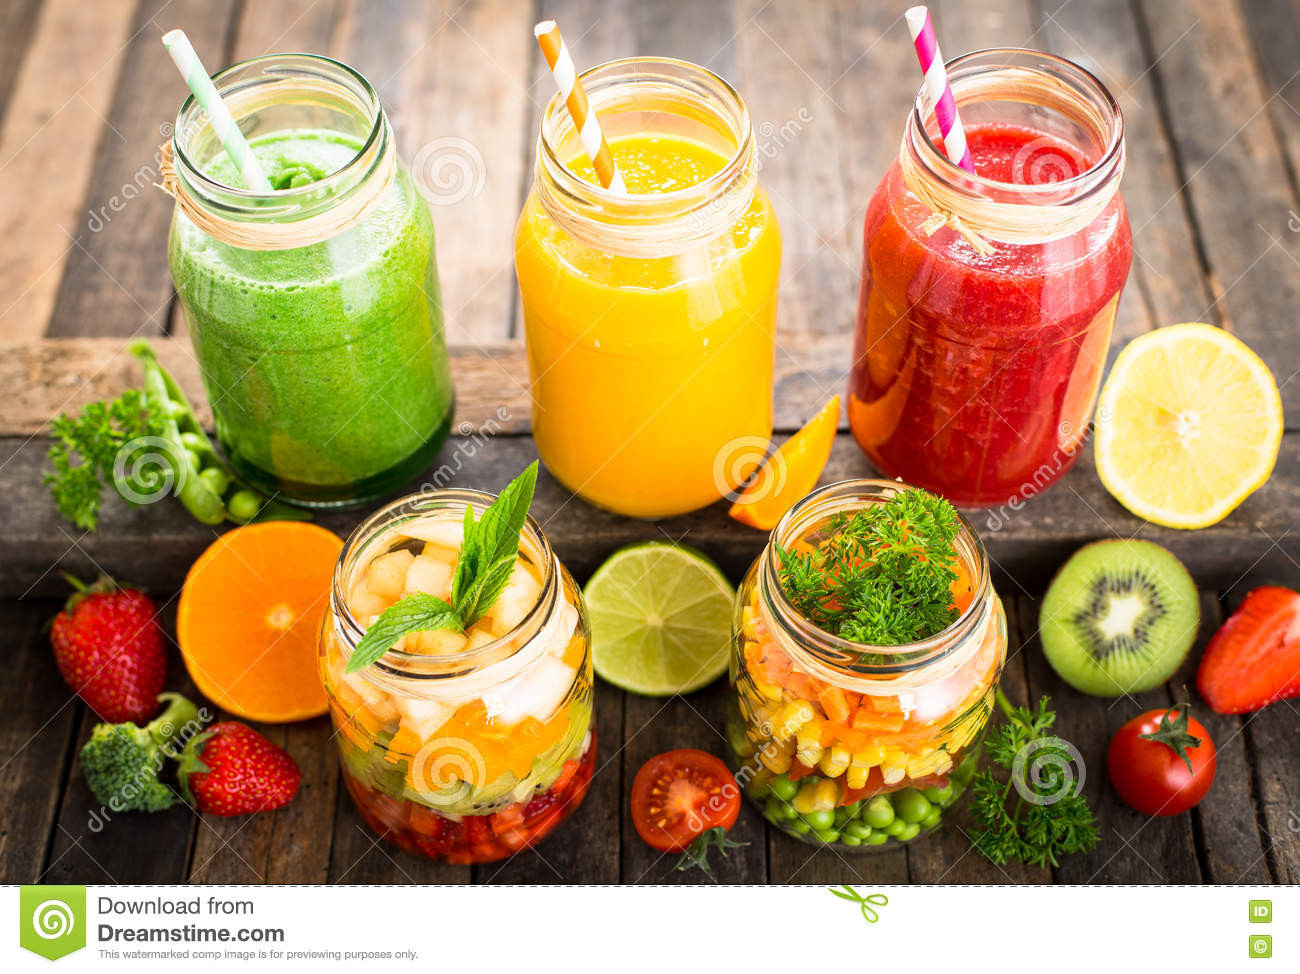 Healthy Veggie Smoothies
 Healthy Fruit And Ve able Smoothies Royalty Free Stock